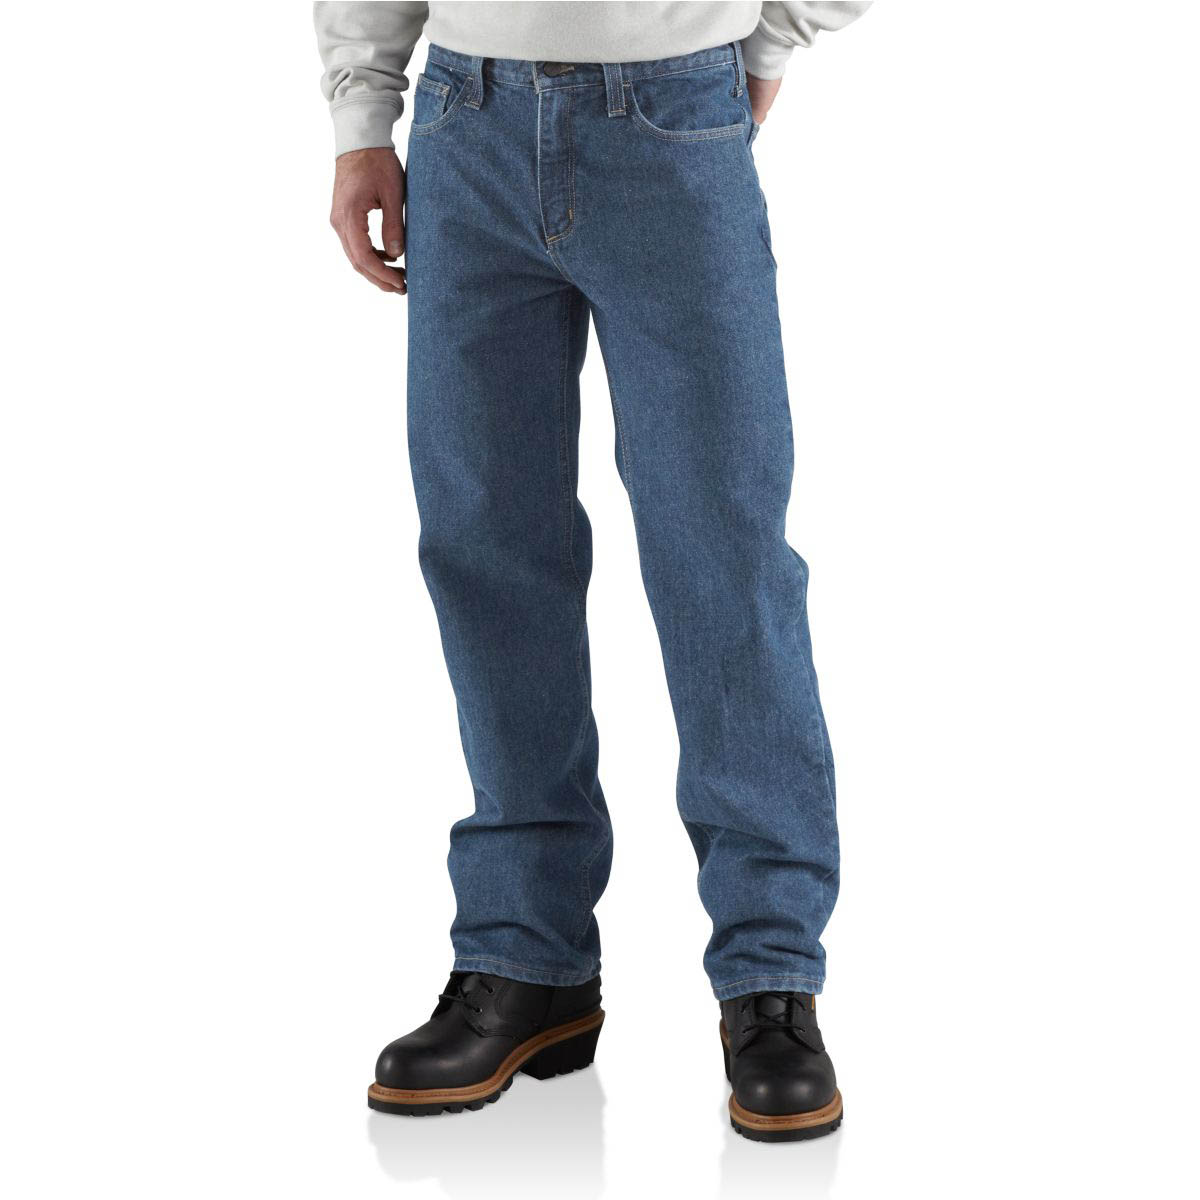 Carhartt Men's Flame Resistant Utility Jean Relaxed Fit